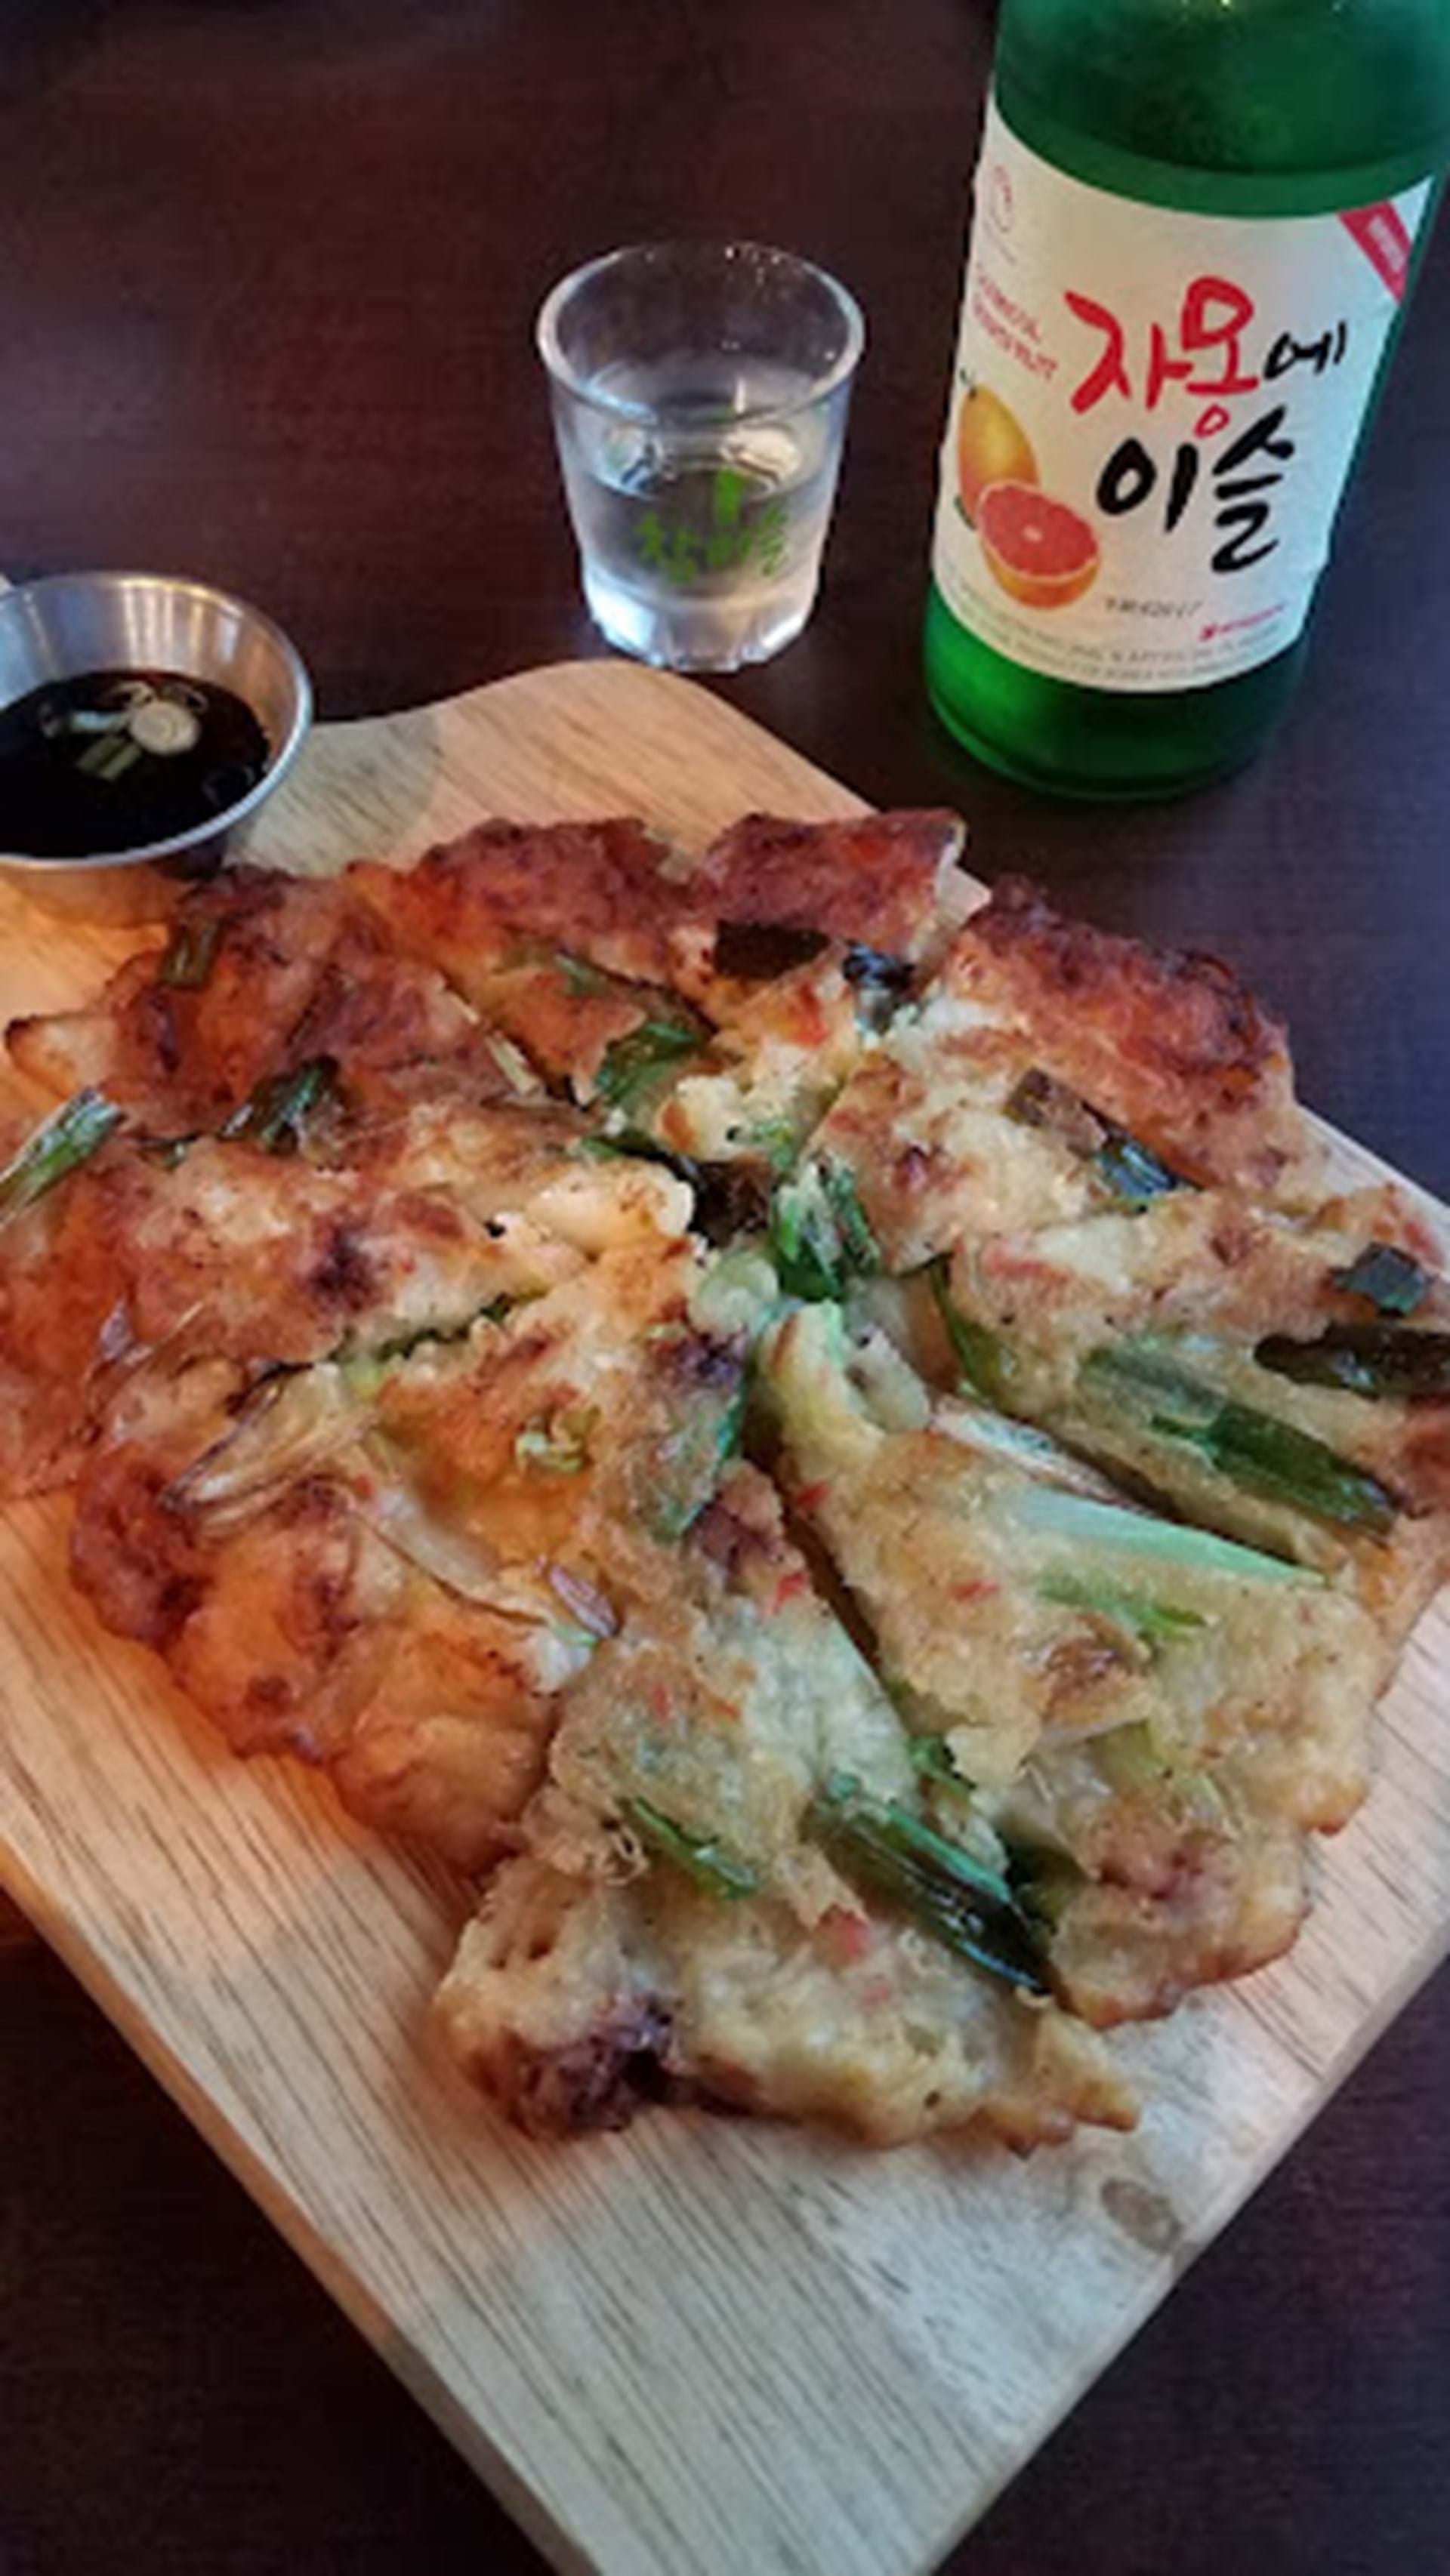 The crab-scallion pancake with a house-made sauce and cool alcoholic beverage is the Korean spin on bar food.